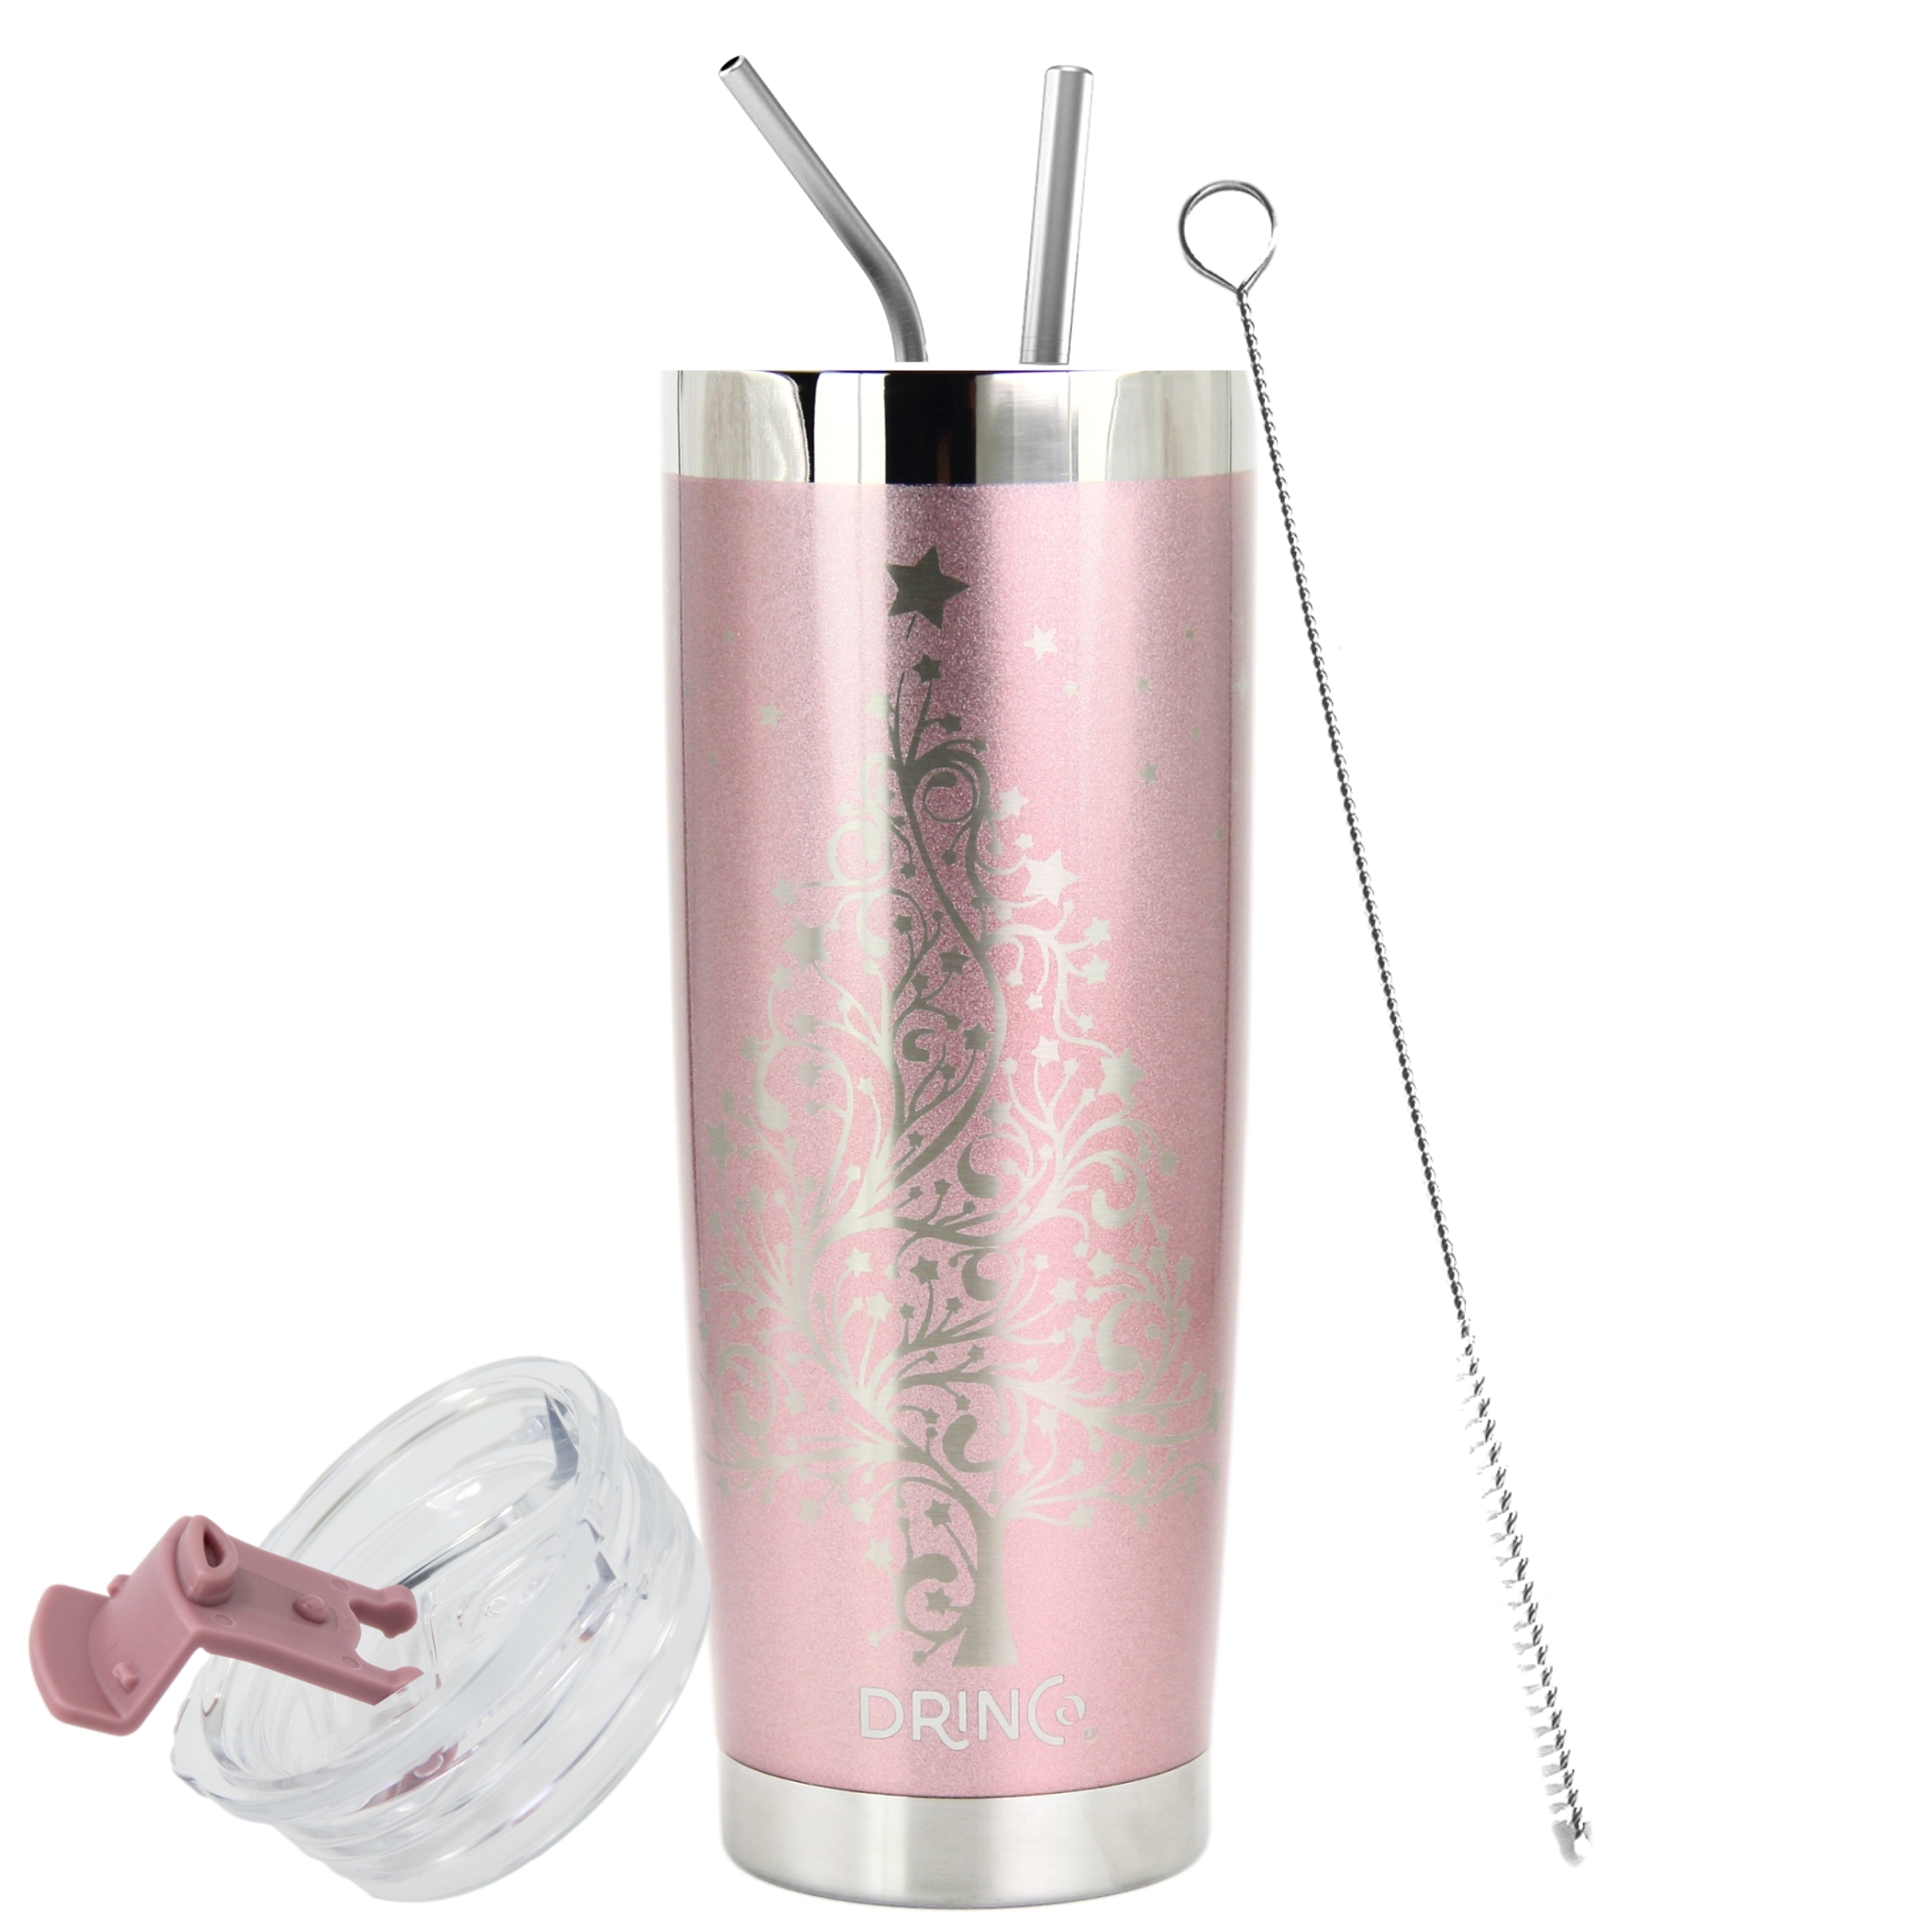 Fanciful Unicorn Antimicrobial 12oz Stainless Steel Double Wall Leakproof Straw Kincaid Tumbler, Size: 3.2 inch x 3.2 inch x 6.77 inch, 7190-W910